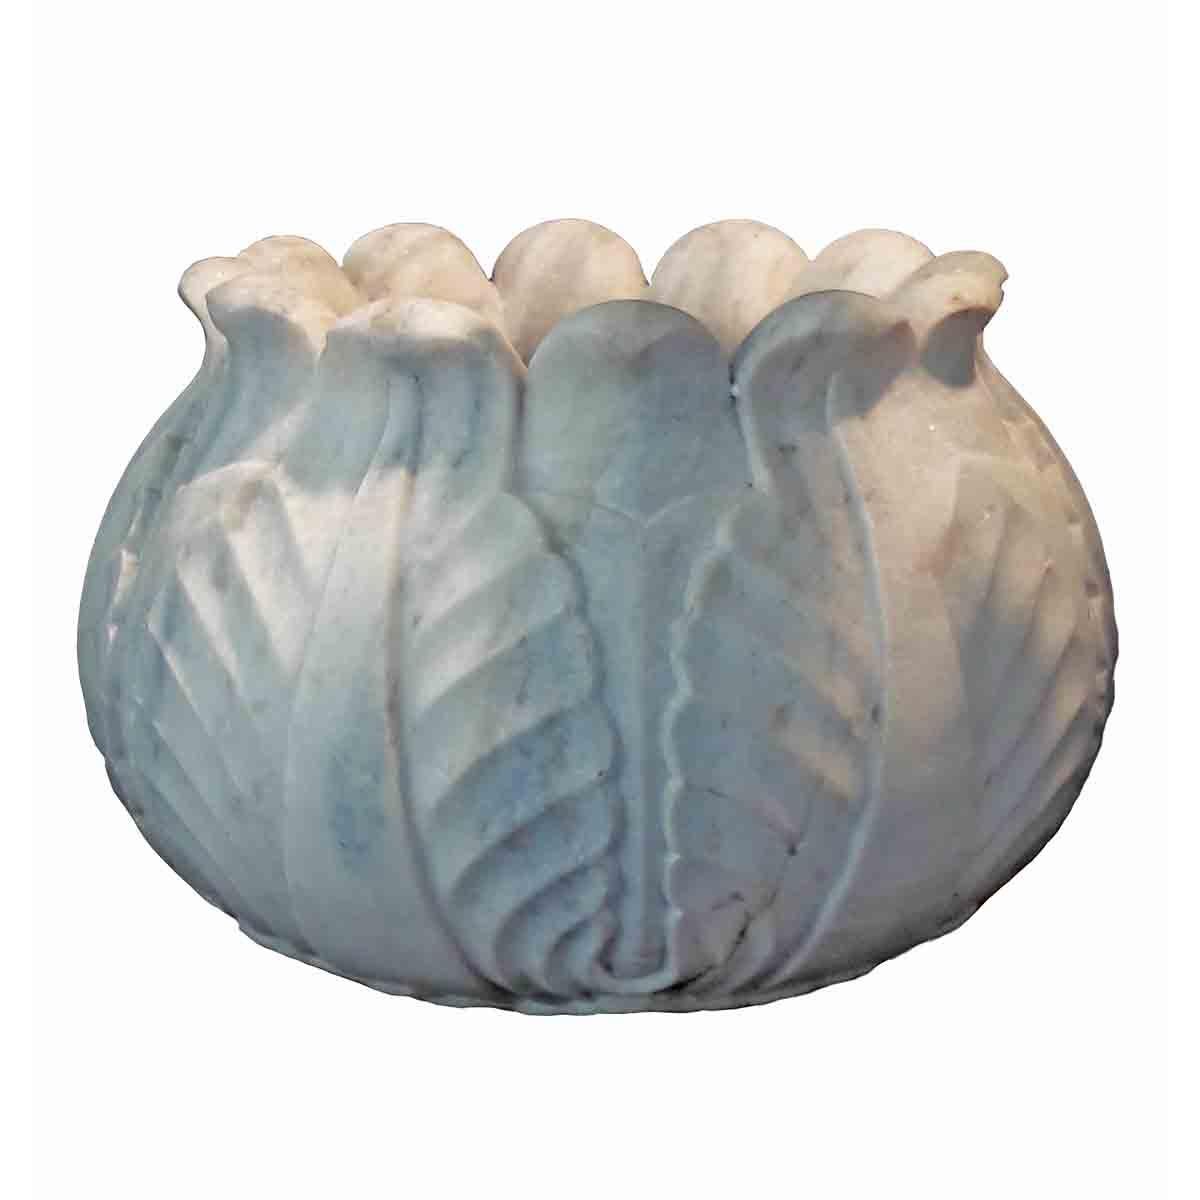 Marble Planter / Jardinière / Cachepot from India, Late 20th Century